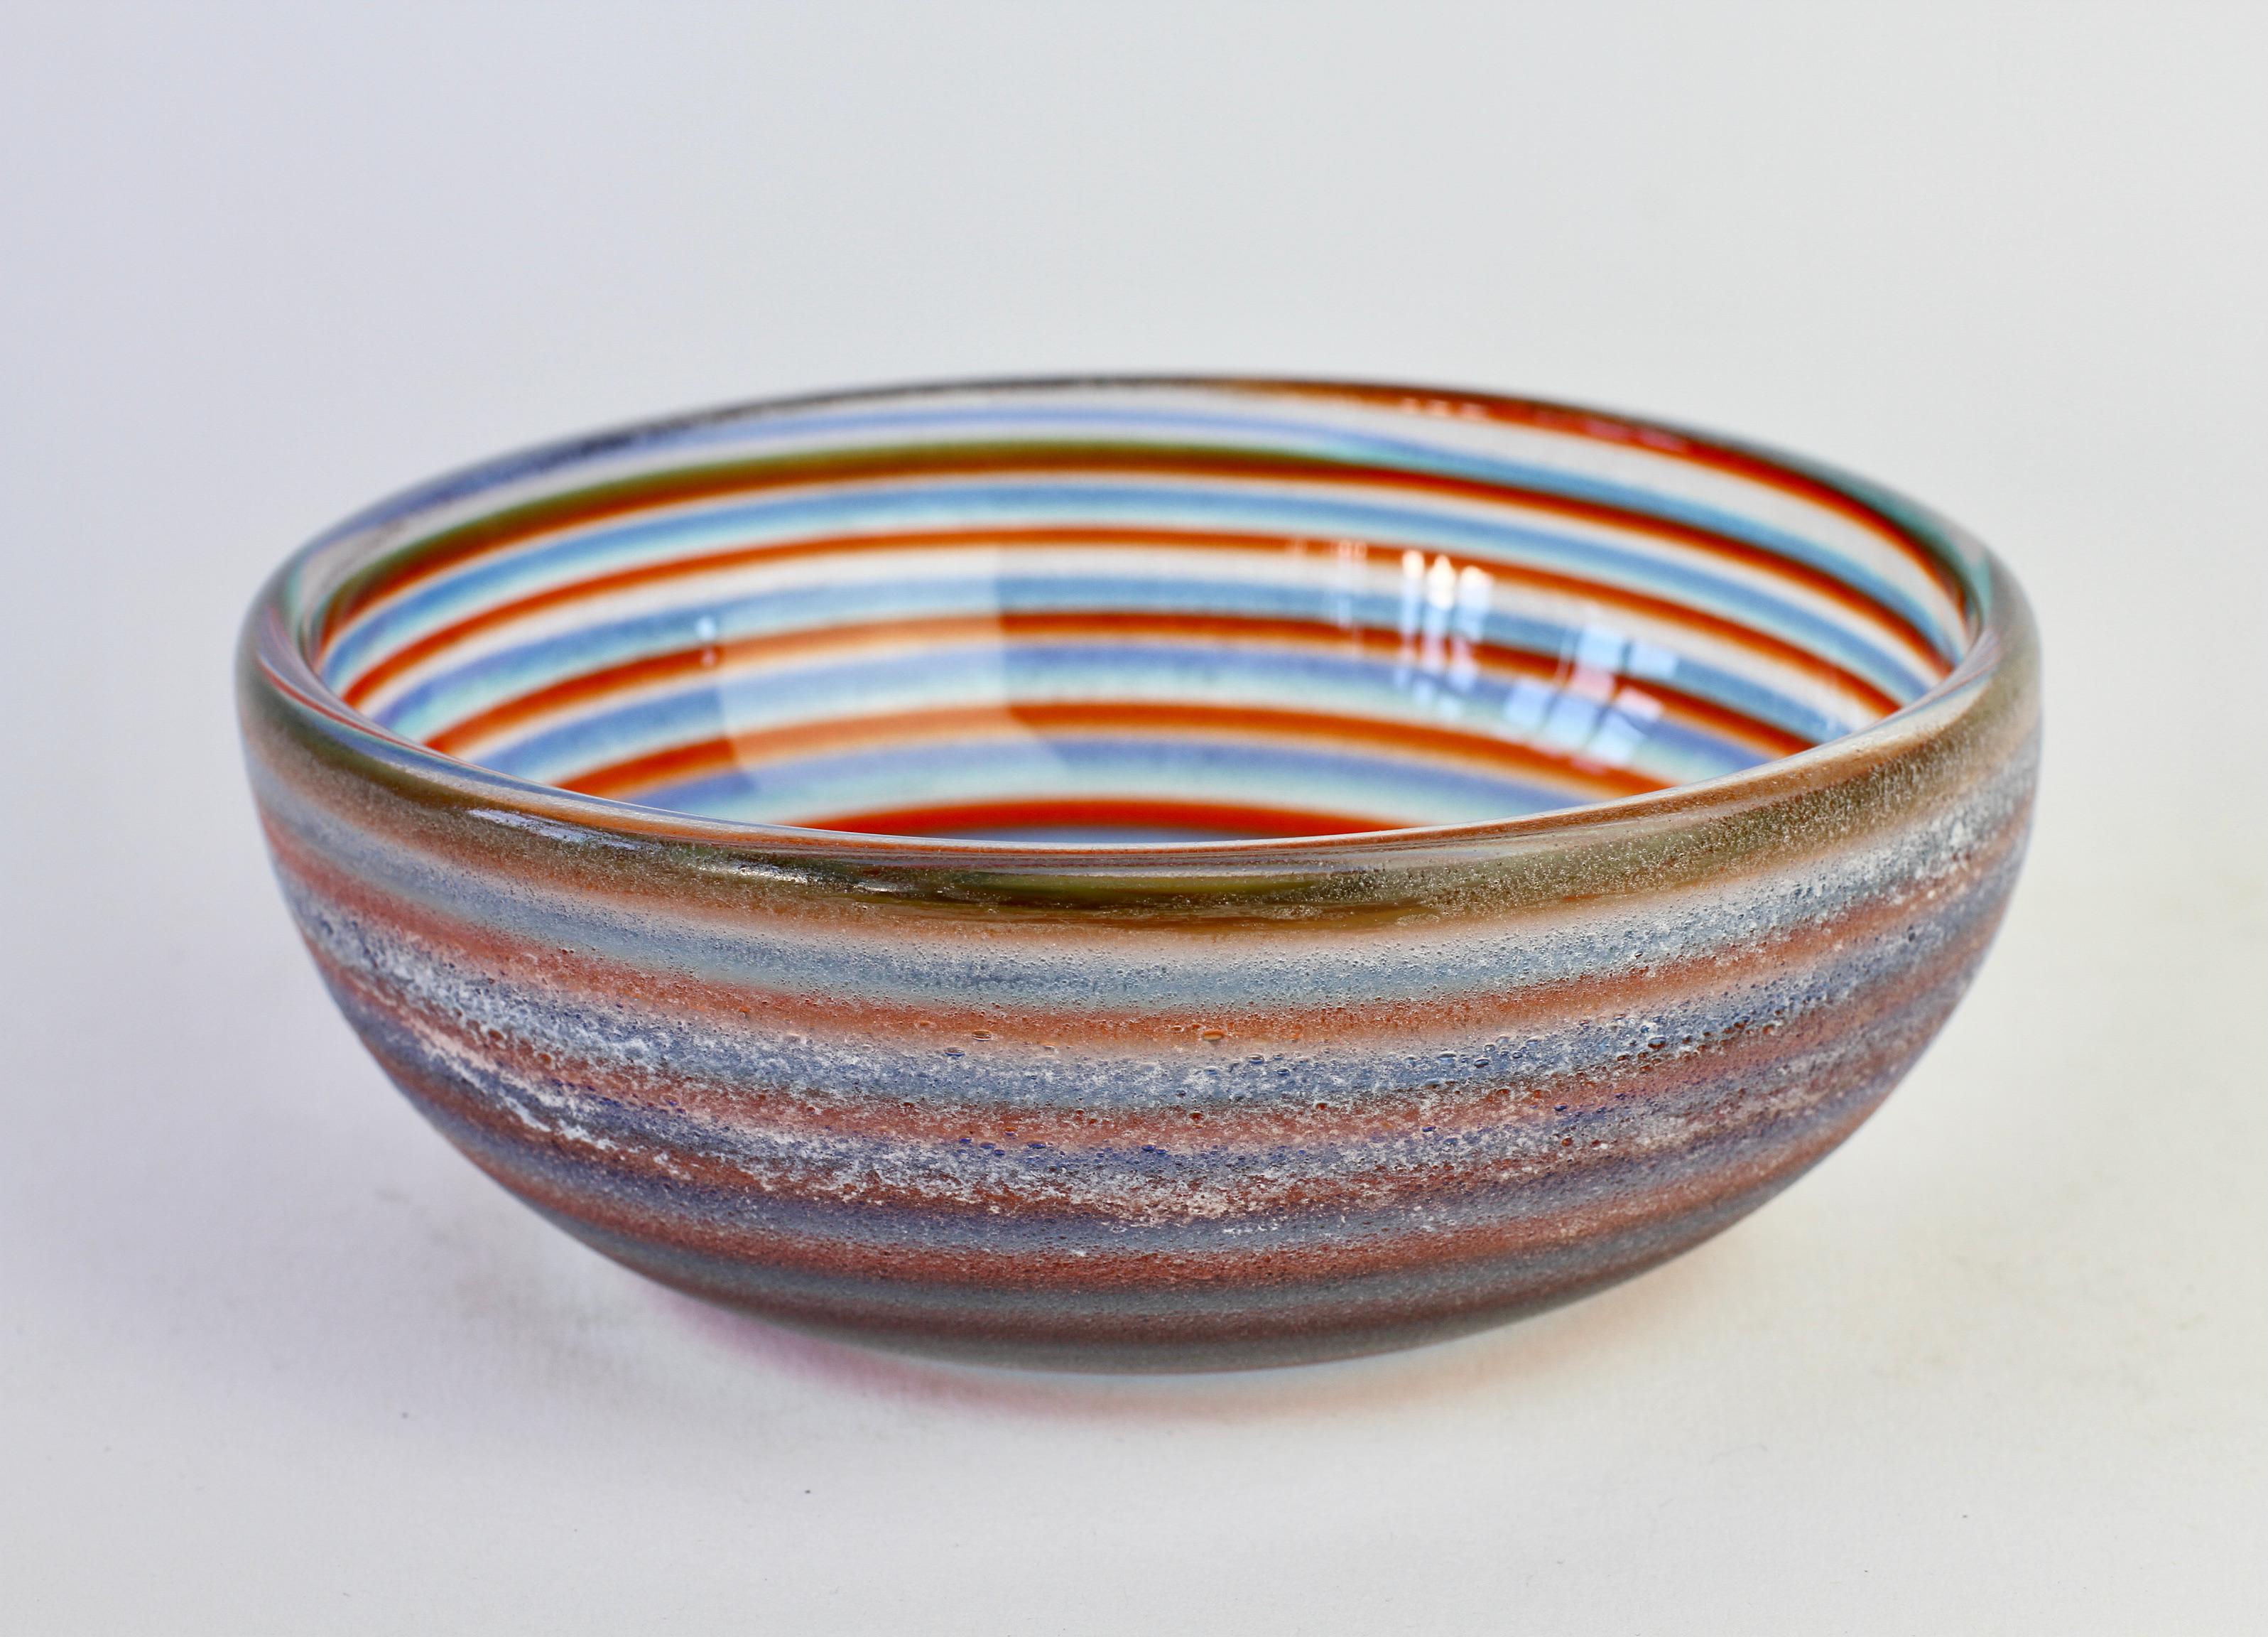 Vintage midcentury Murano 'Corroso' glass serving bowl, dish or ashtray by Cenedese, circa 1970-1990 (design is attributed to Fulvio Bianconi but we do not have any documentation for this). Wonderful clear glass with a colorful spiral inclusions of